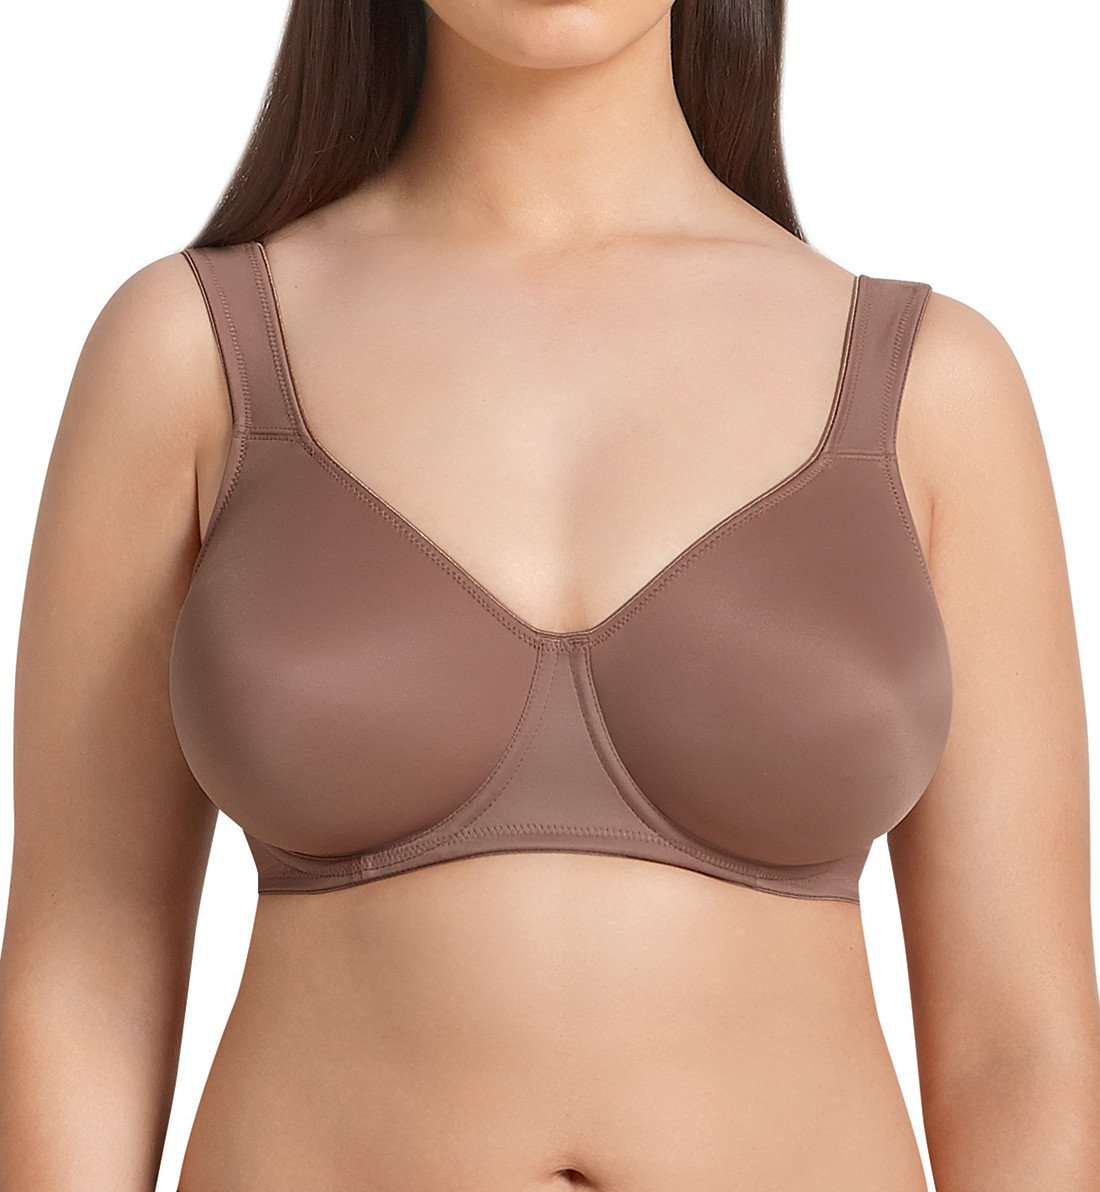 Rosa Faia by Anita Twin Seamless Underwire Bra (5490),30D,Deep Taupe - Deep Taupe,30D